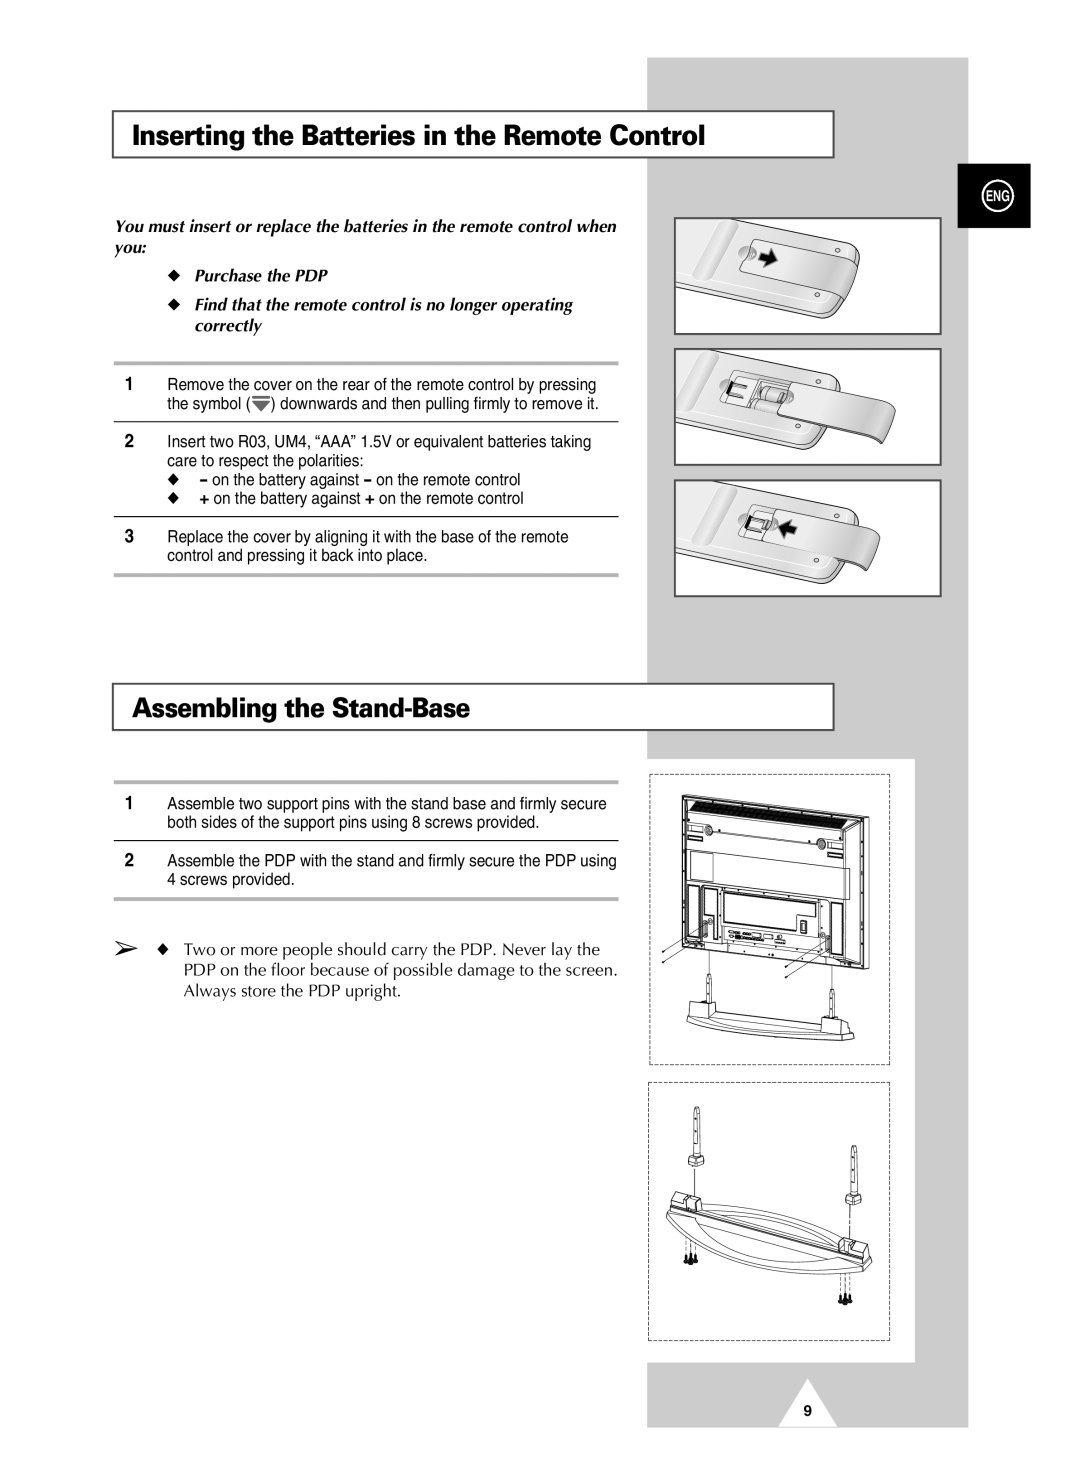 Samsung PAL60 manual Inserting the Batteries in the Remote Control, Assembling the Stand-Base 